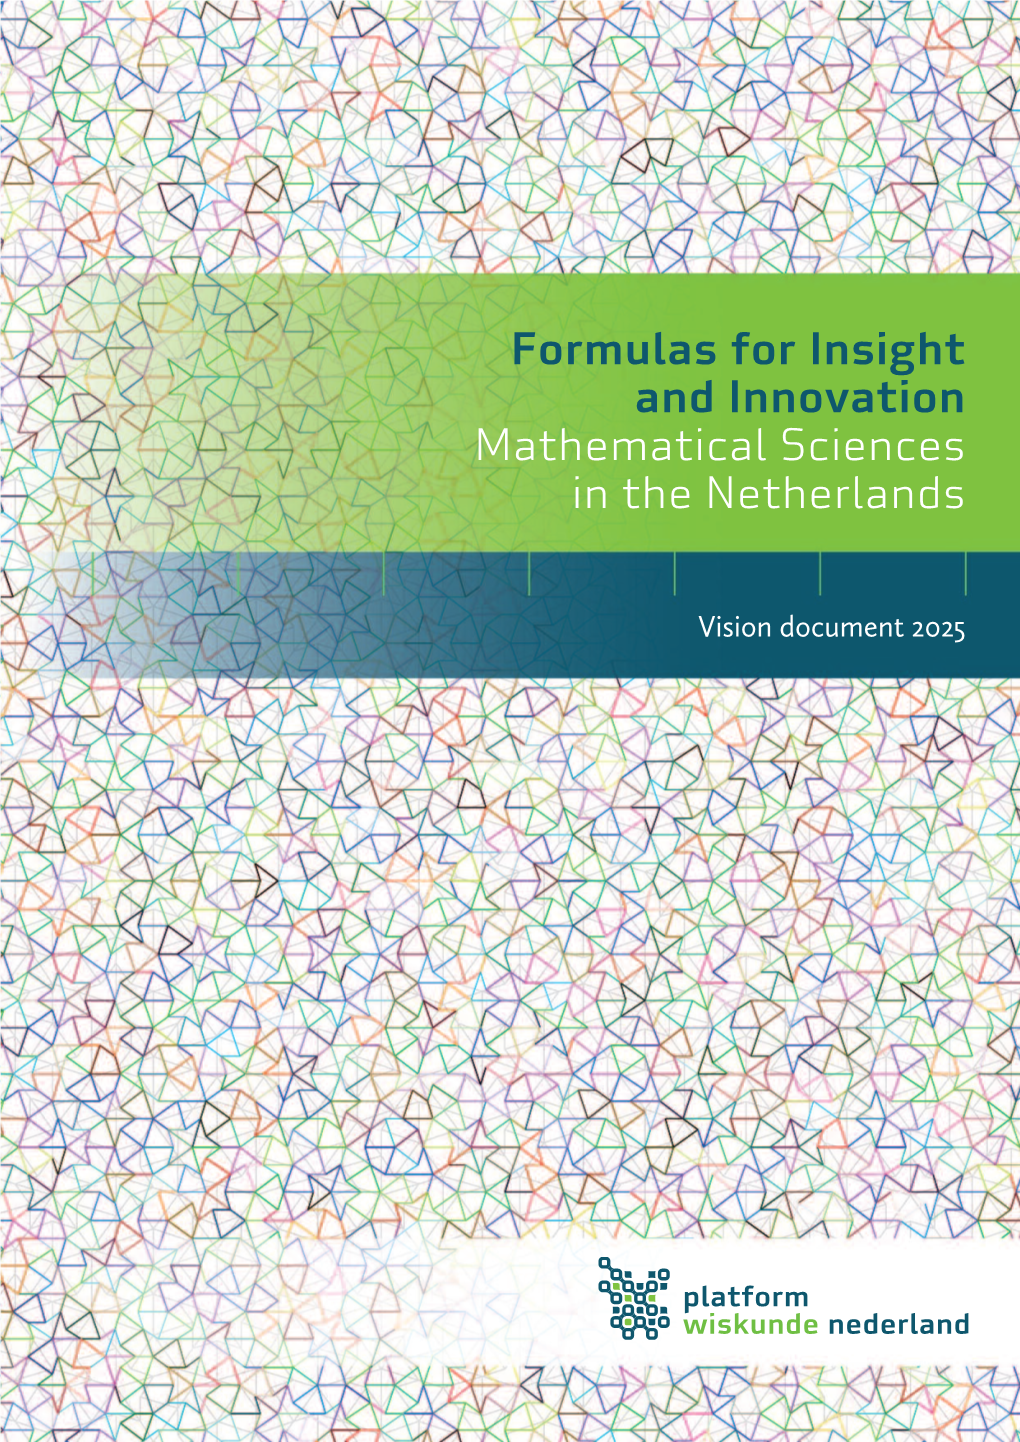 Formulas for Insight and Innovation Mathematical Sciences in the Netherlands